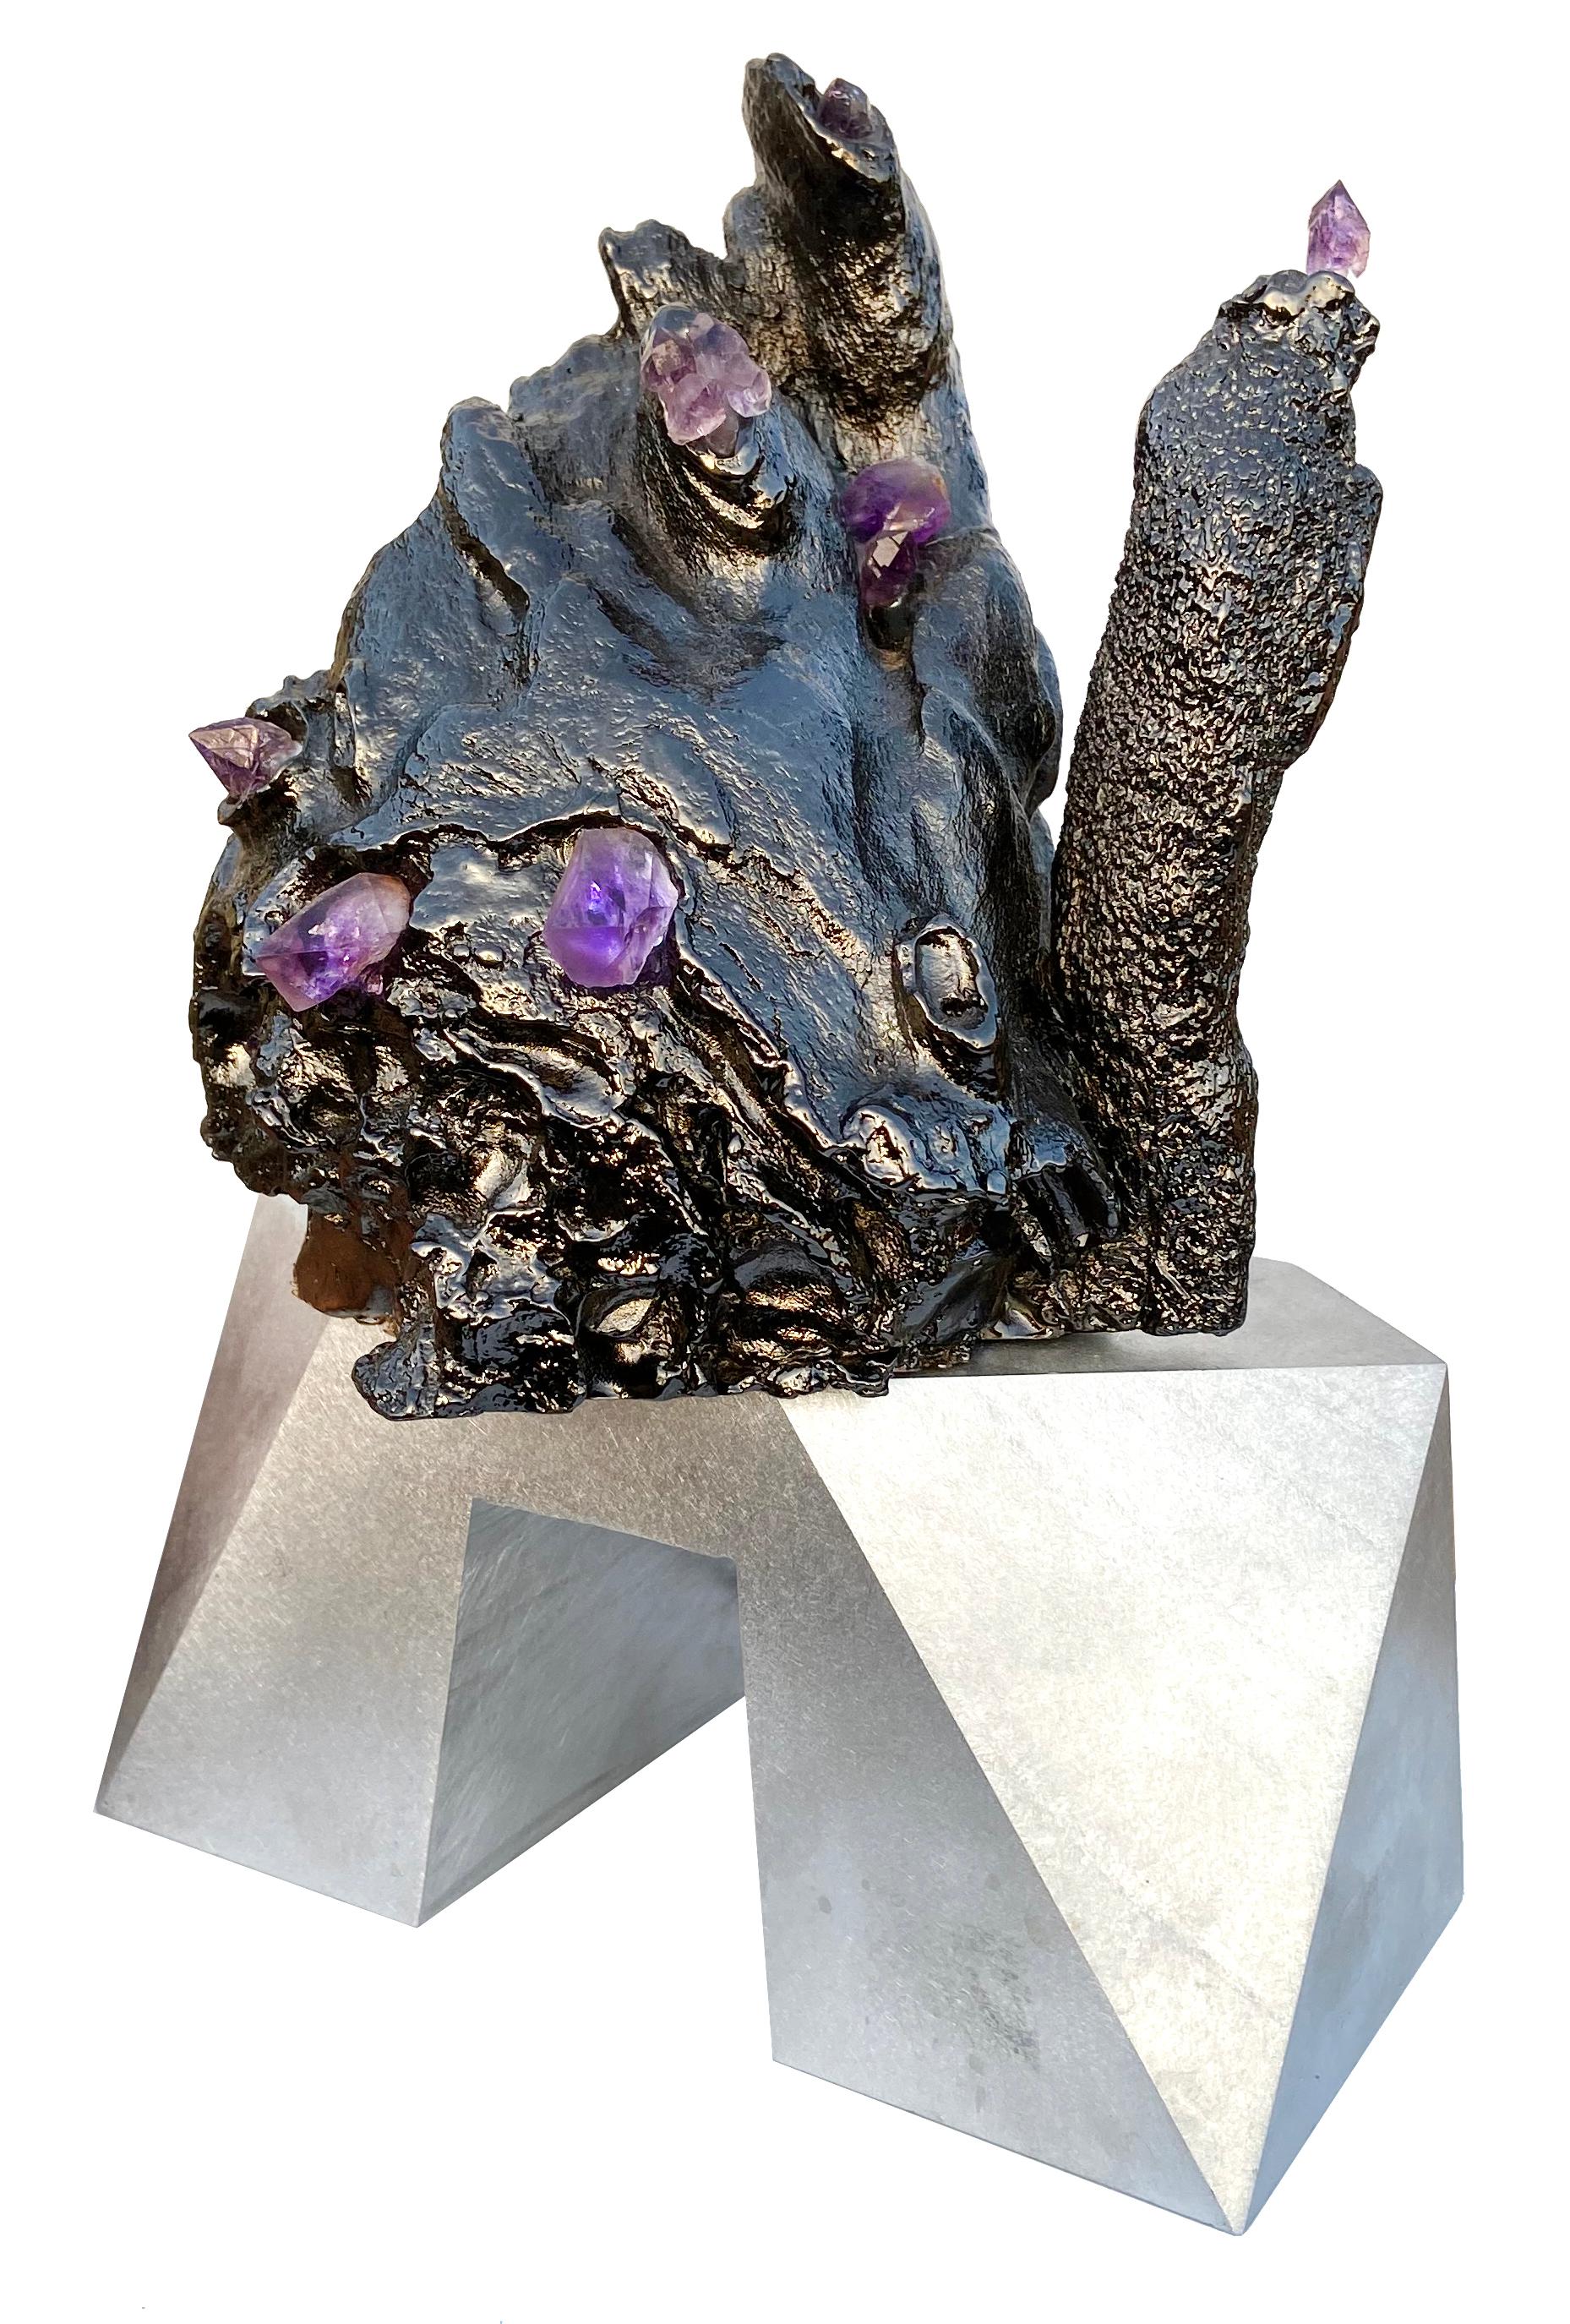 SEA SPONGE SERIES (“HYDROTHERMAL VENTS”)  
NATURAL LIGHT

Bronze-cast desert burl, Sonora Alandra double-terminated amethyst & ghost amethyst, milled aluminum base, LED lights, cloth-covered cord, 2019-20, 7.125 x 3.375 x 10 in. 

Micah Heimlich is